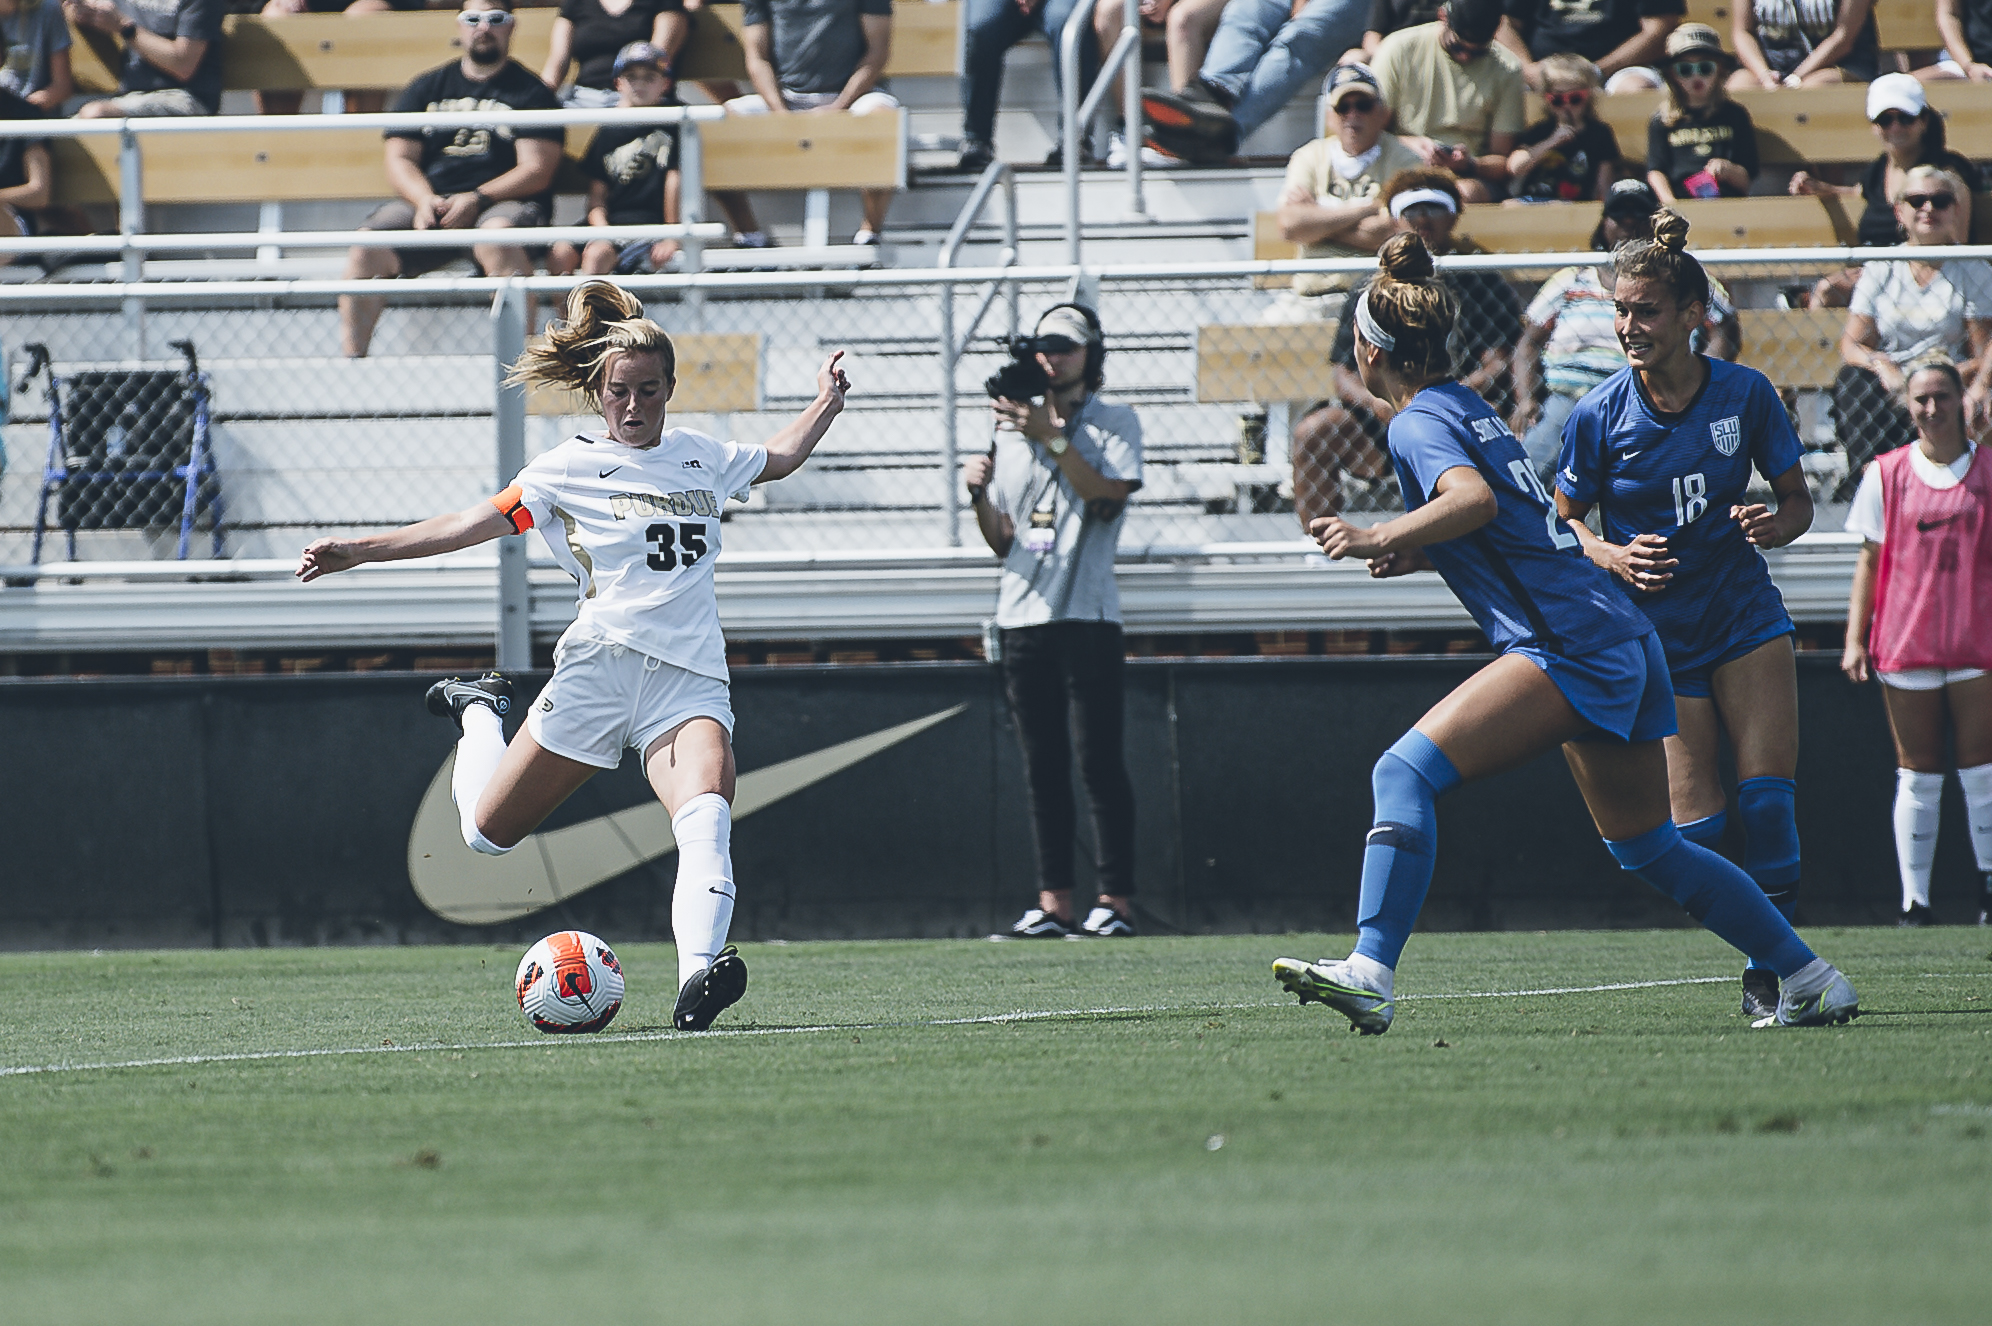 Sarah Griffith prepares to kick the ball past opponents during a Purdue soccer match.